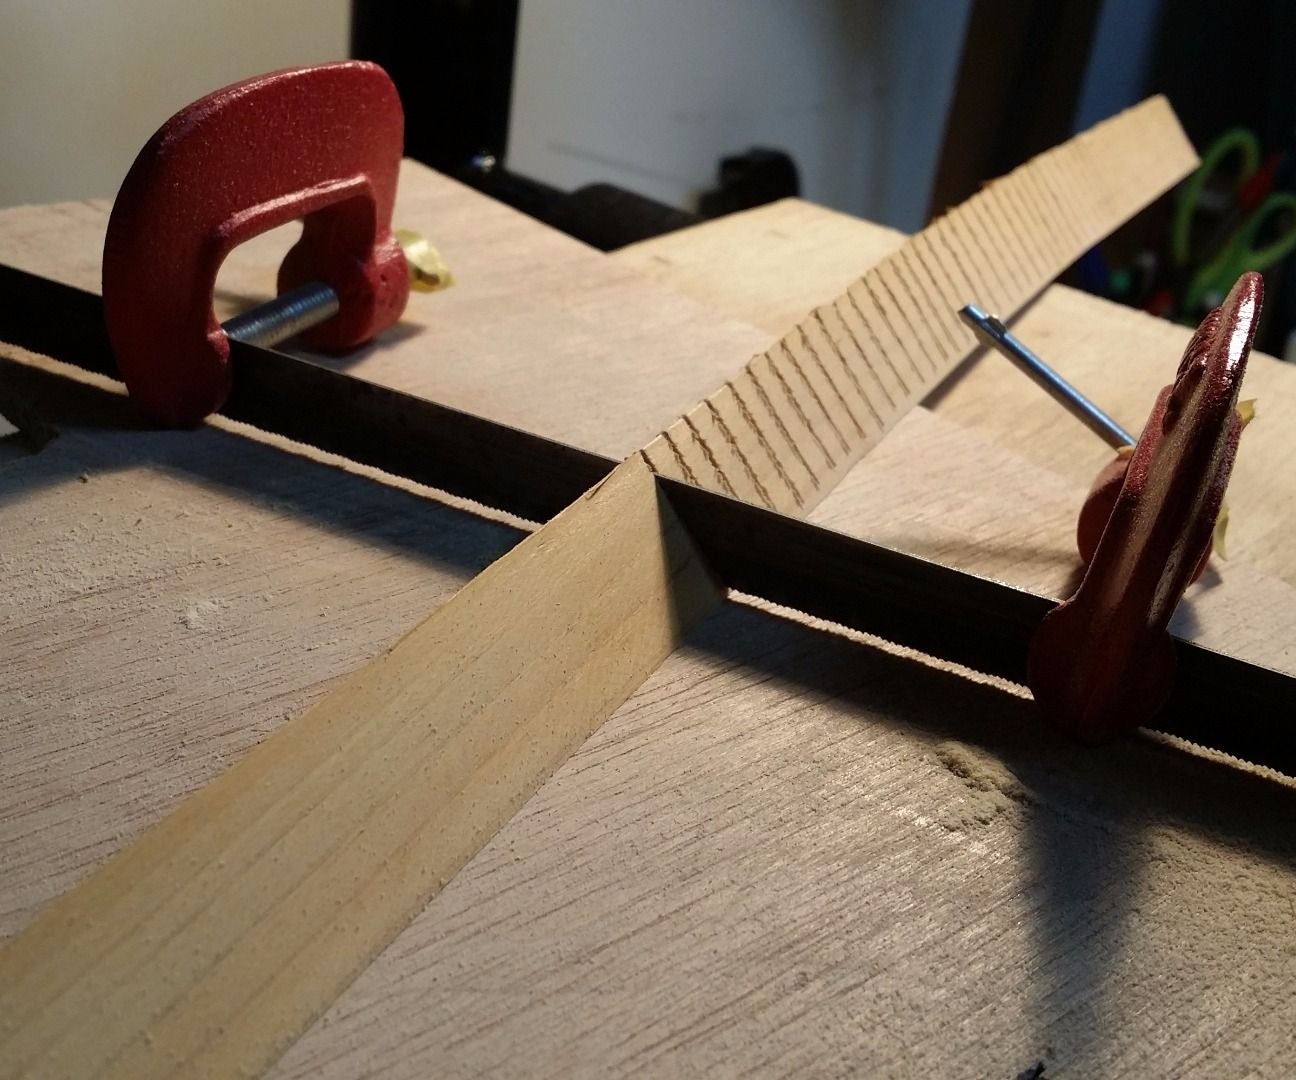 Easy Hack to Cut Almost All the Way Through Wood